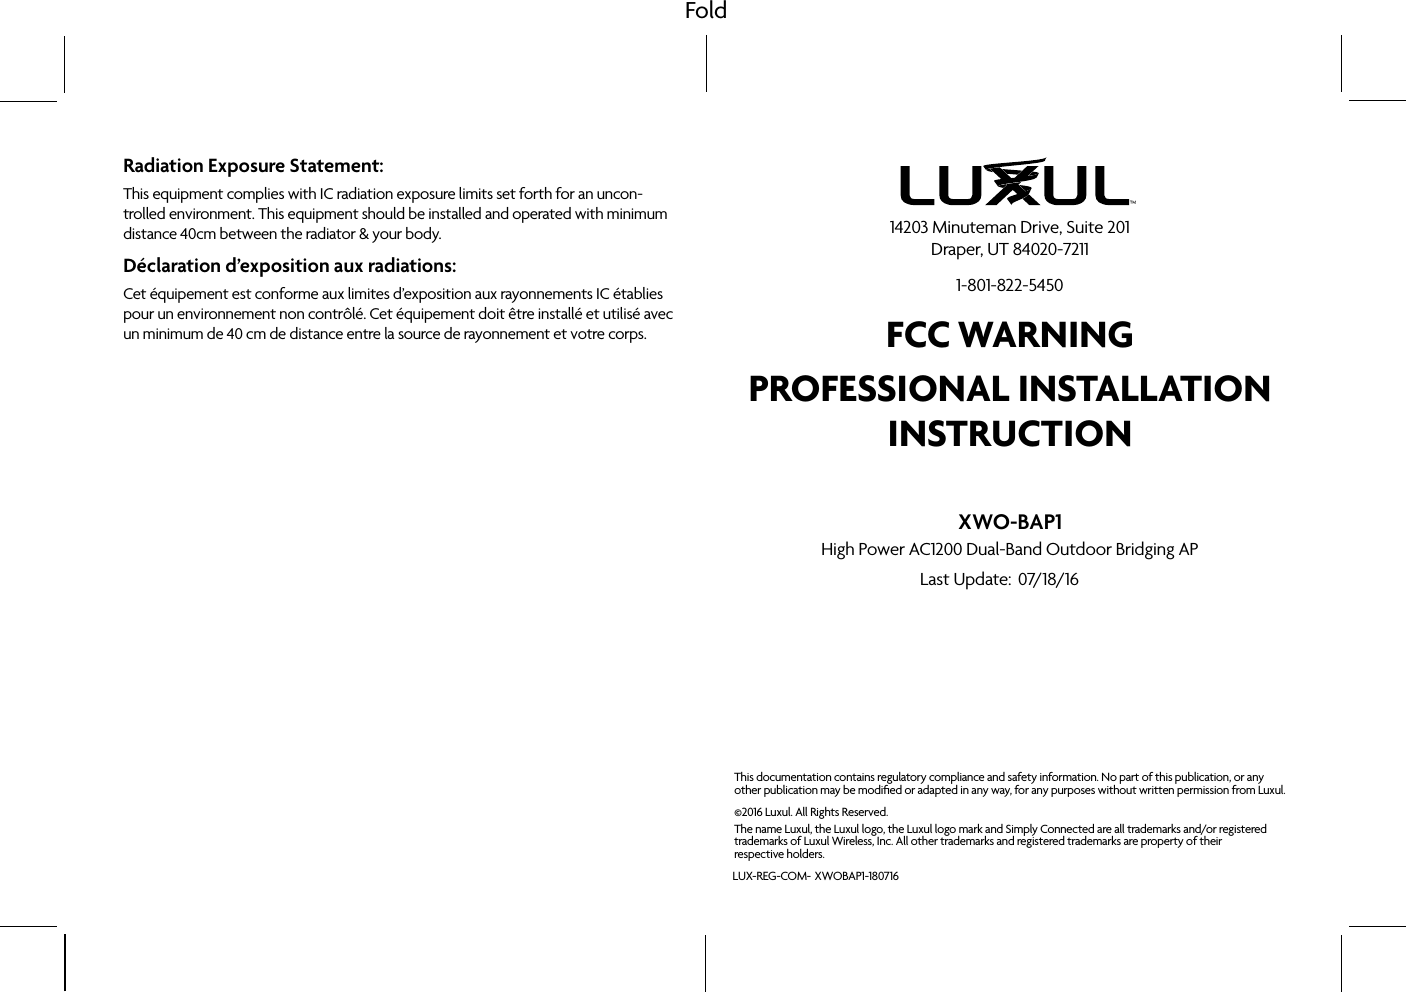 Fold©2016 Luxul. All Rights Reserved.The name Luxul, the Luxul logo, the Luxul logo mark and Simply Connected are all trademarks and/or registered trademarks of Luxul Wireless, Inc. All other trademarks and registered trademarks are property of their  respective holders.LUX-REG-COM-This documentation contains regulatory compliance and safety information. No part of this publication, or any other publication may be modiﬁed or adapted in any way, for any purposes without written permission from Luxul. FCC WARNING PROFESSIONAL INSTALLATION INSTRUCTION14203 Minuteman Drive, Suite 201 Draper, UT 84020-72111-801-822-5450Last Update: Radiation Exposure Statement:This equipment complies with IC radiation exposure limits set forth for an uncon-trolled environment. This equipment should be installed and operated with minimum distance 40cm between the radiator &amp; your body.Déclaration d’exposition aux radiations:Cet équipement est conforme aux limites d’exposition aux rayonnements IC établies pour un environnement non contrôlé. Cet équipement doit être installé et utilisé avec un minimum de 40 cm de distance entre la source de rayonnement et votre corps.XWO-BAP1High Power AC1200 Dual-Band Outdoor Bridging APXWOBAP1-18071607/18/16